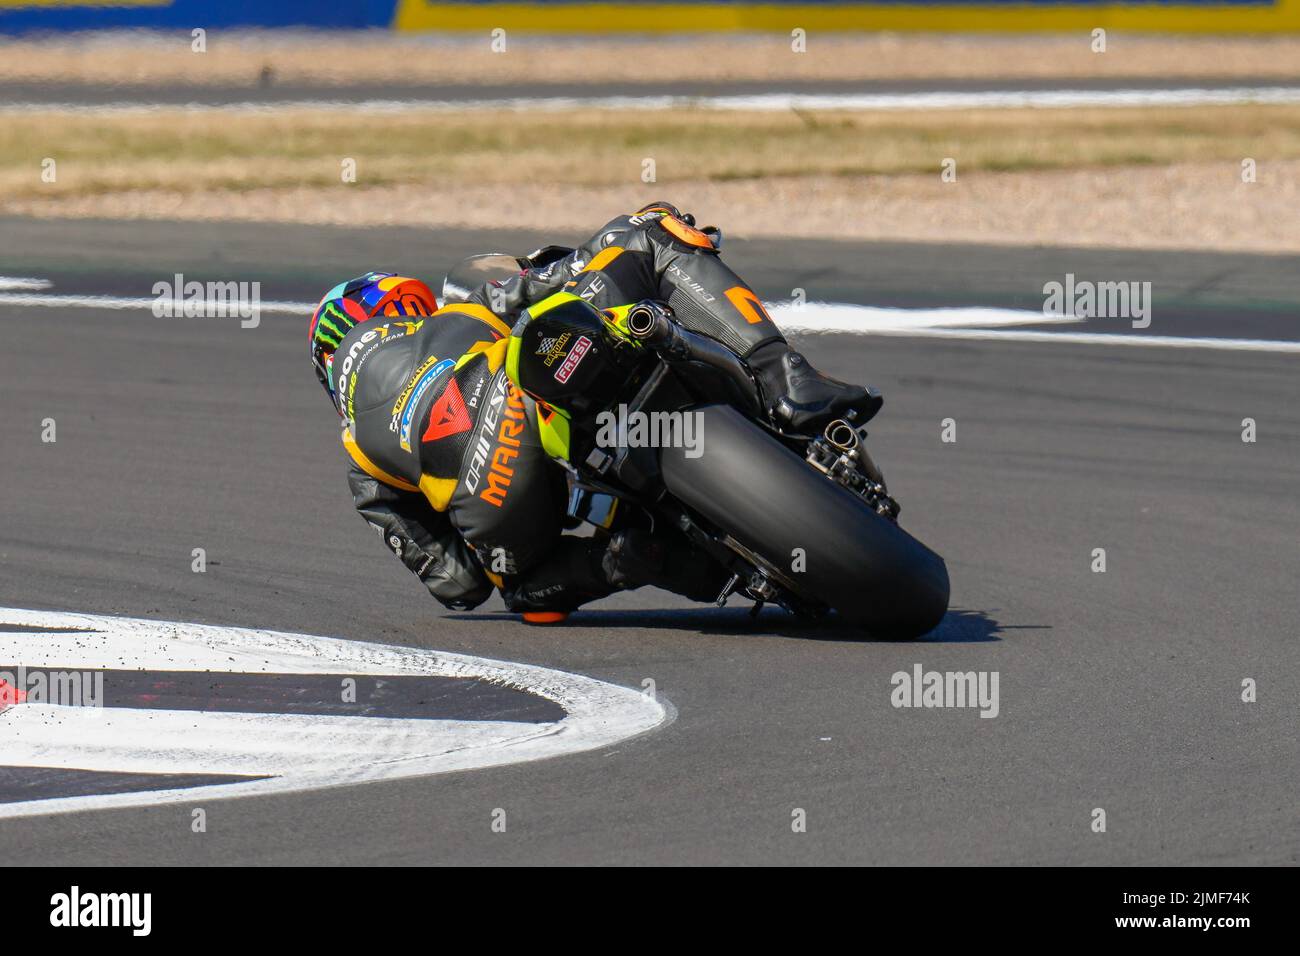 Towcester, UK. 06th Aug, 2022. Luca MARINI (Italy) of the Mooney VR46 Racing Team (Ducati) during the 2022 Monster Energy Grand Prix MotoGP Free Practice 3 session at Silverstone Circuit, Towcester, England on the 6th August 2022. Photo by David Horn. Credit: PRiME Media Images/Alamy Live News Stock Photo